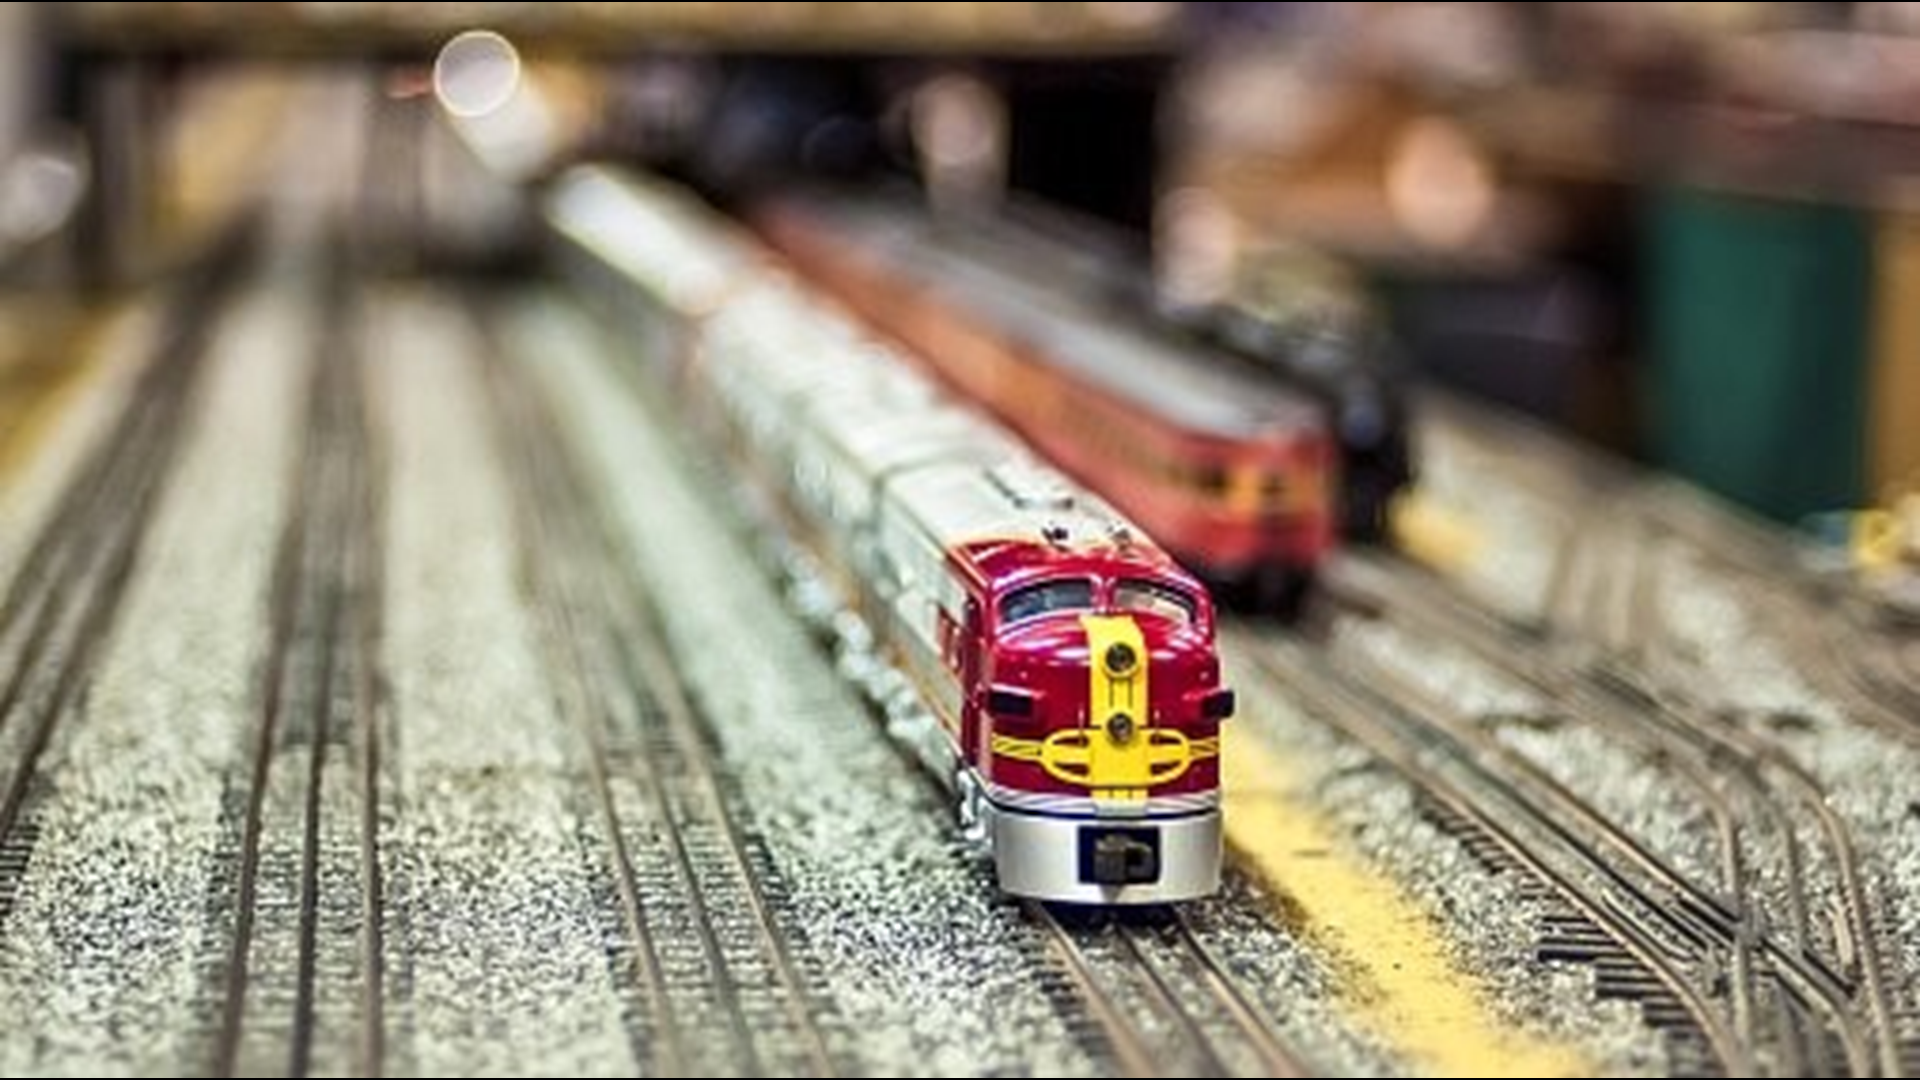 A 1700 square foot model train layout features over 150 hand-built animated figures and 22 operating trains.